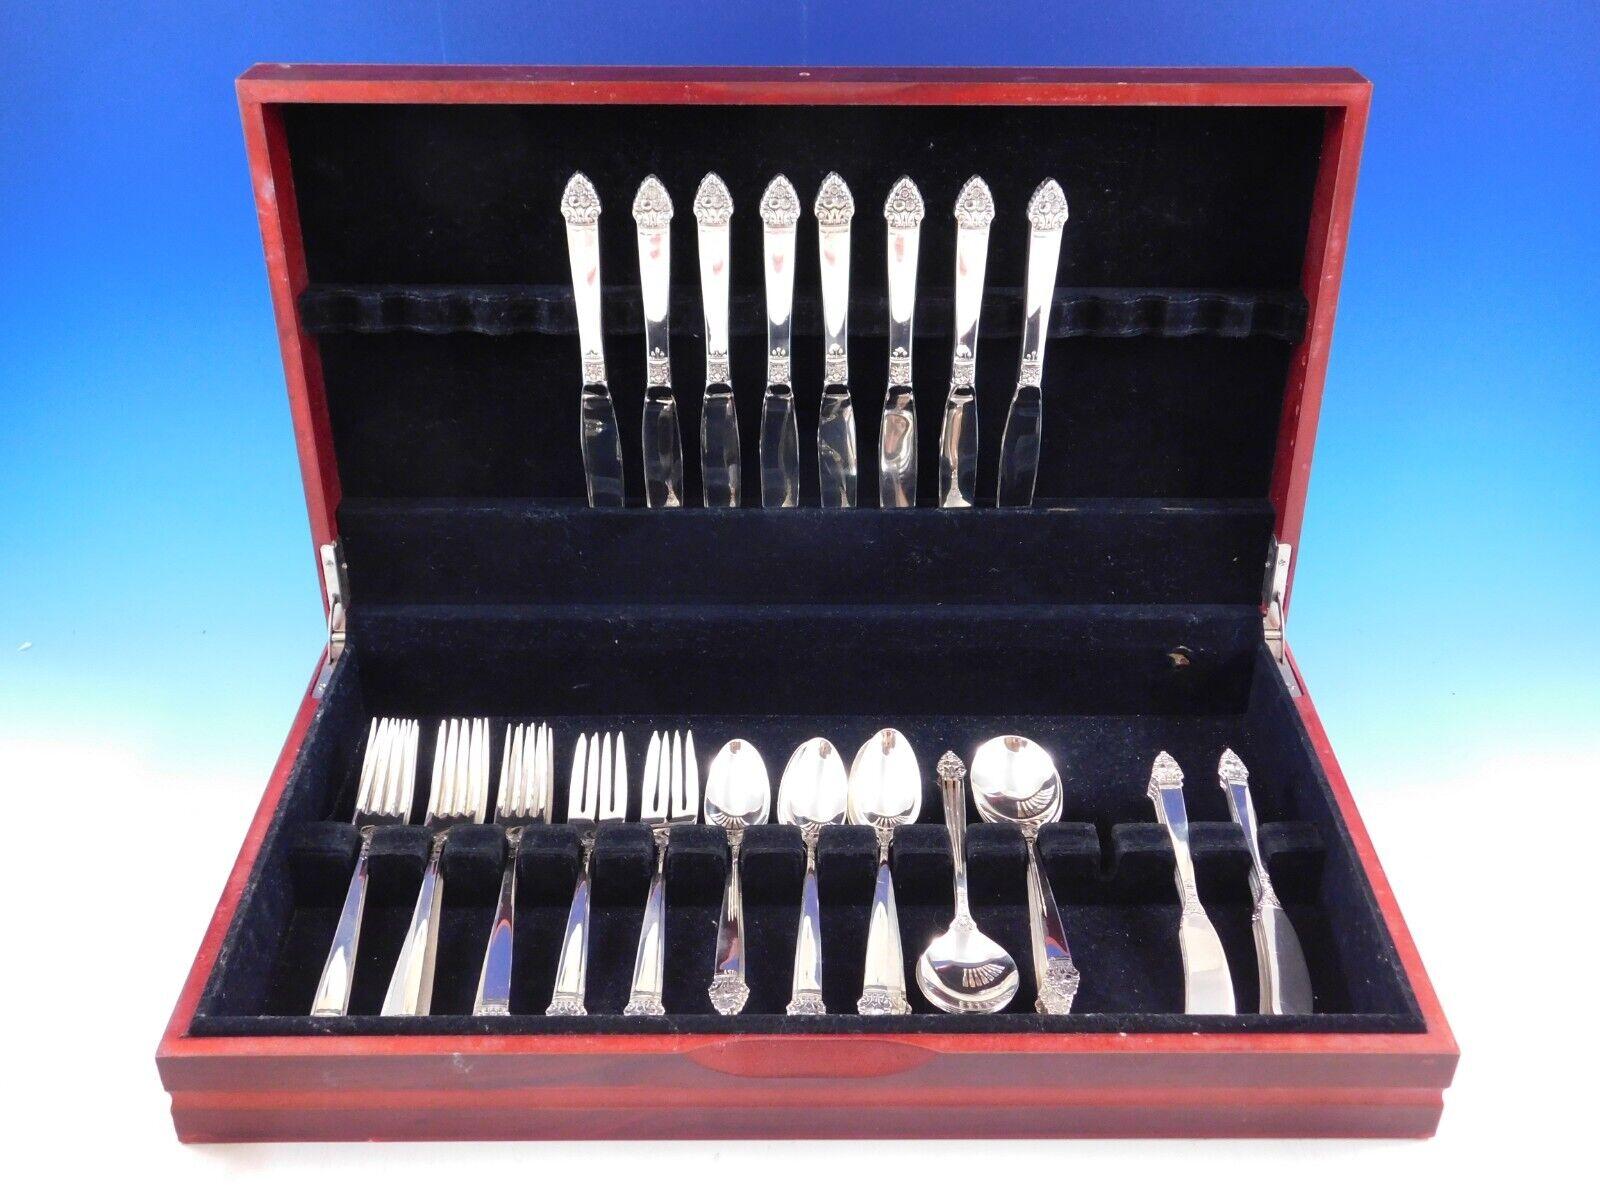 King Cedric by Oneida sterling silver flatware set - 48 pieces. This set includes:

8 Knives, 8 7/8